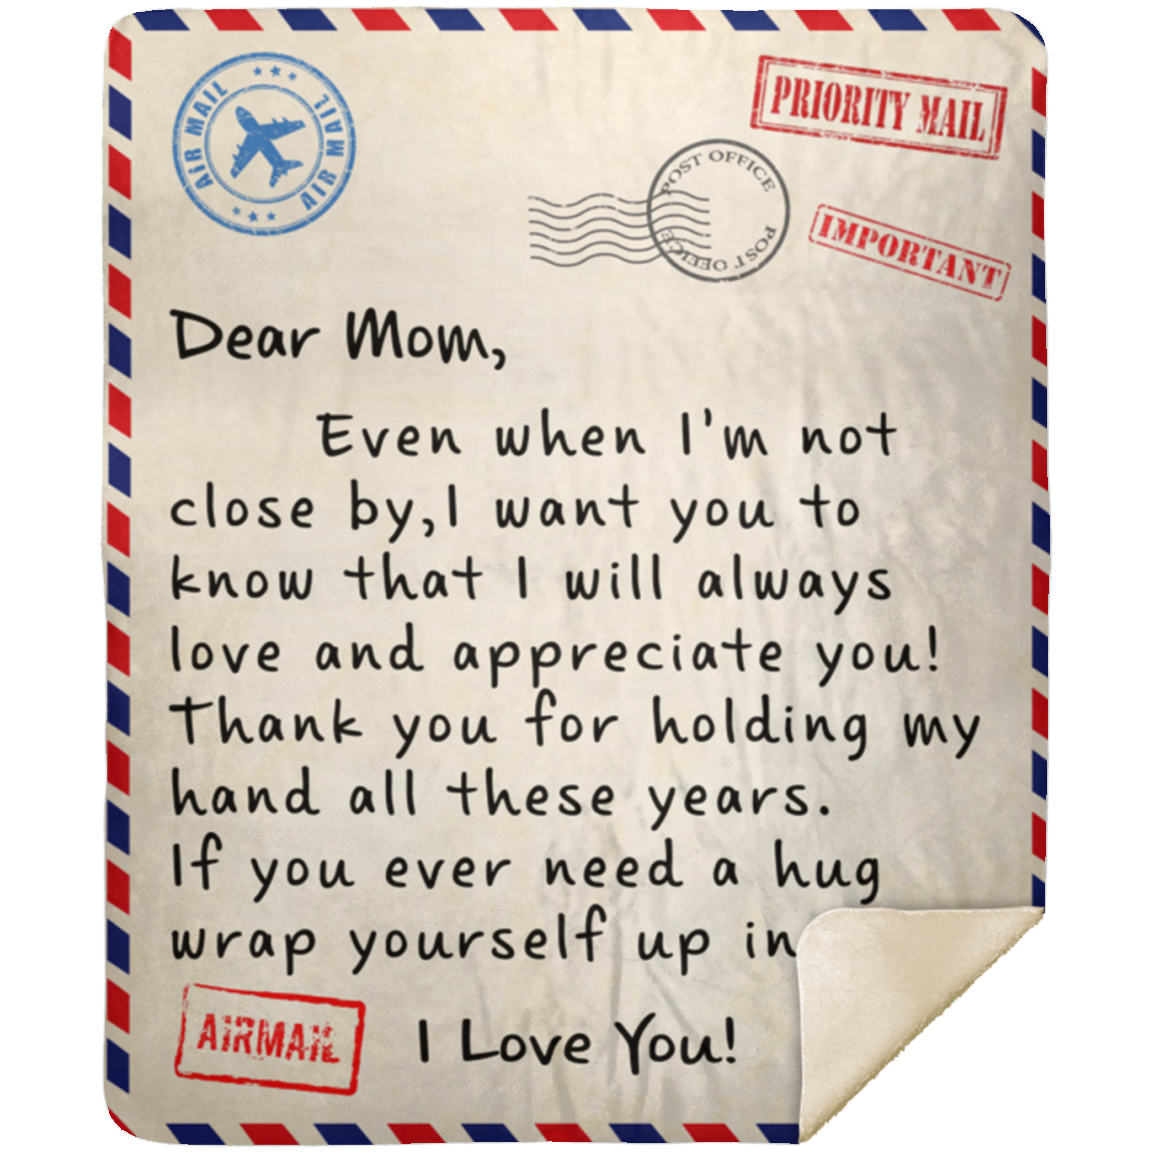 Mothers Day Gifts - Gifts for Mom - Personalized Mom Blanket - Letter to Mom,  Mom Gifts from Daughter or son